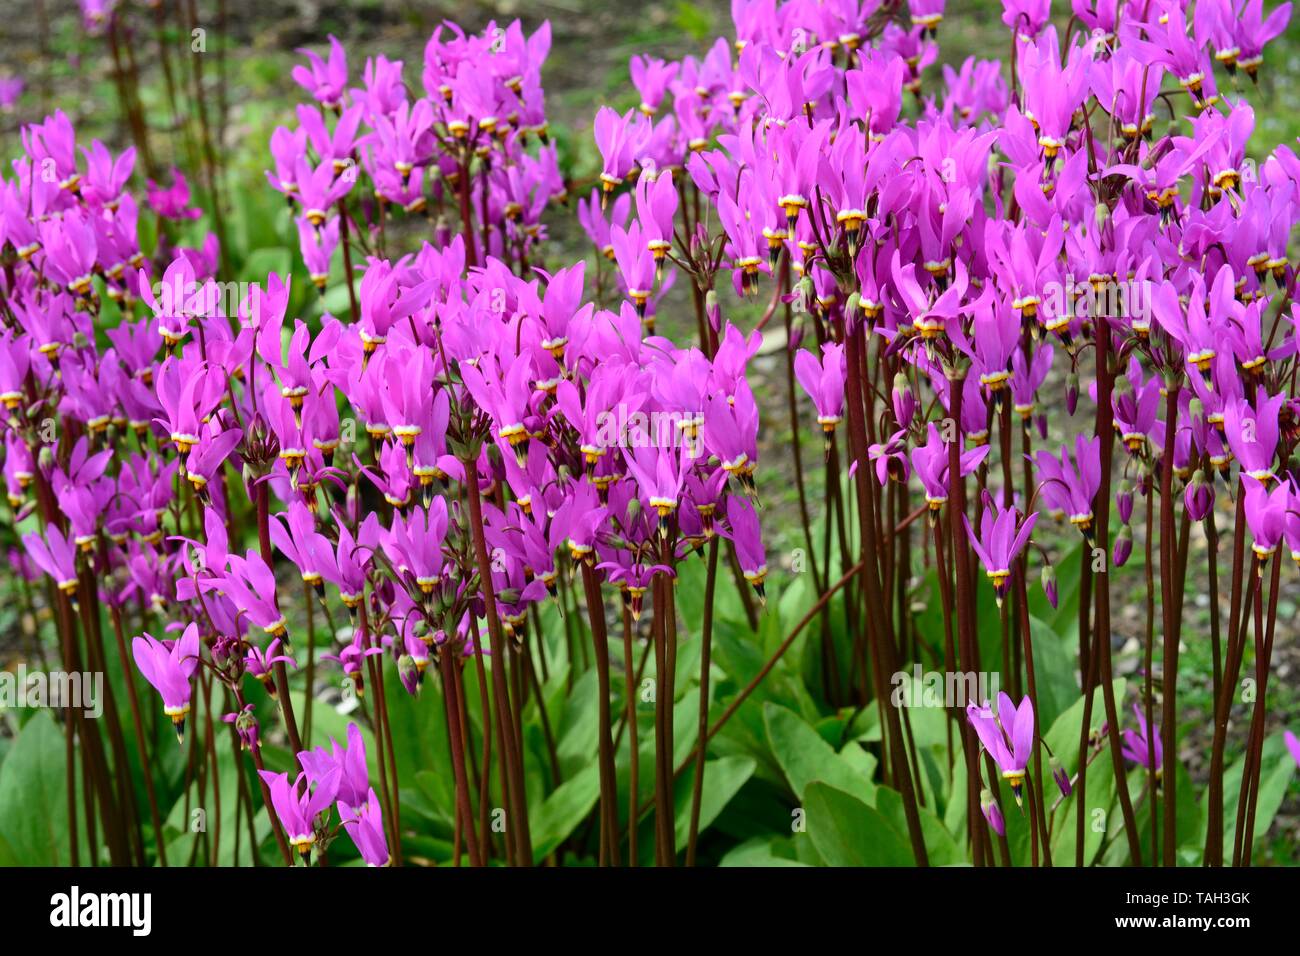 Dodecatheon media saline shooting star flowers  lilac flowers on tall stems Stock Photo